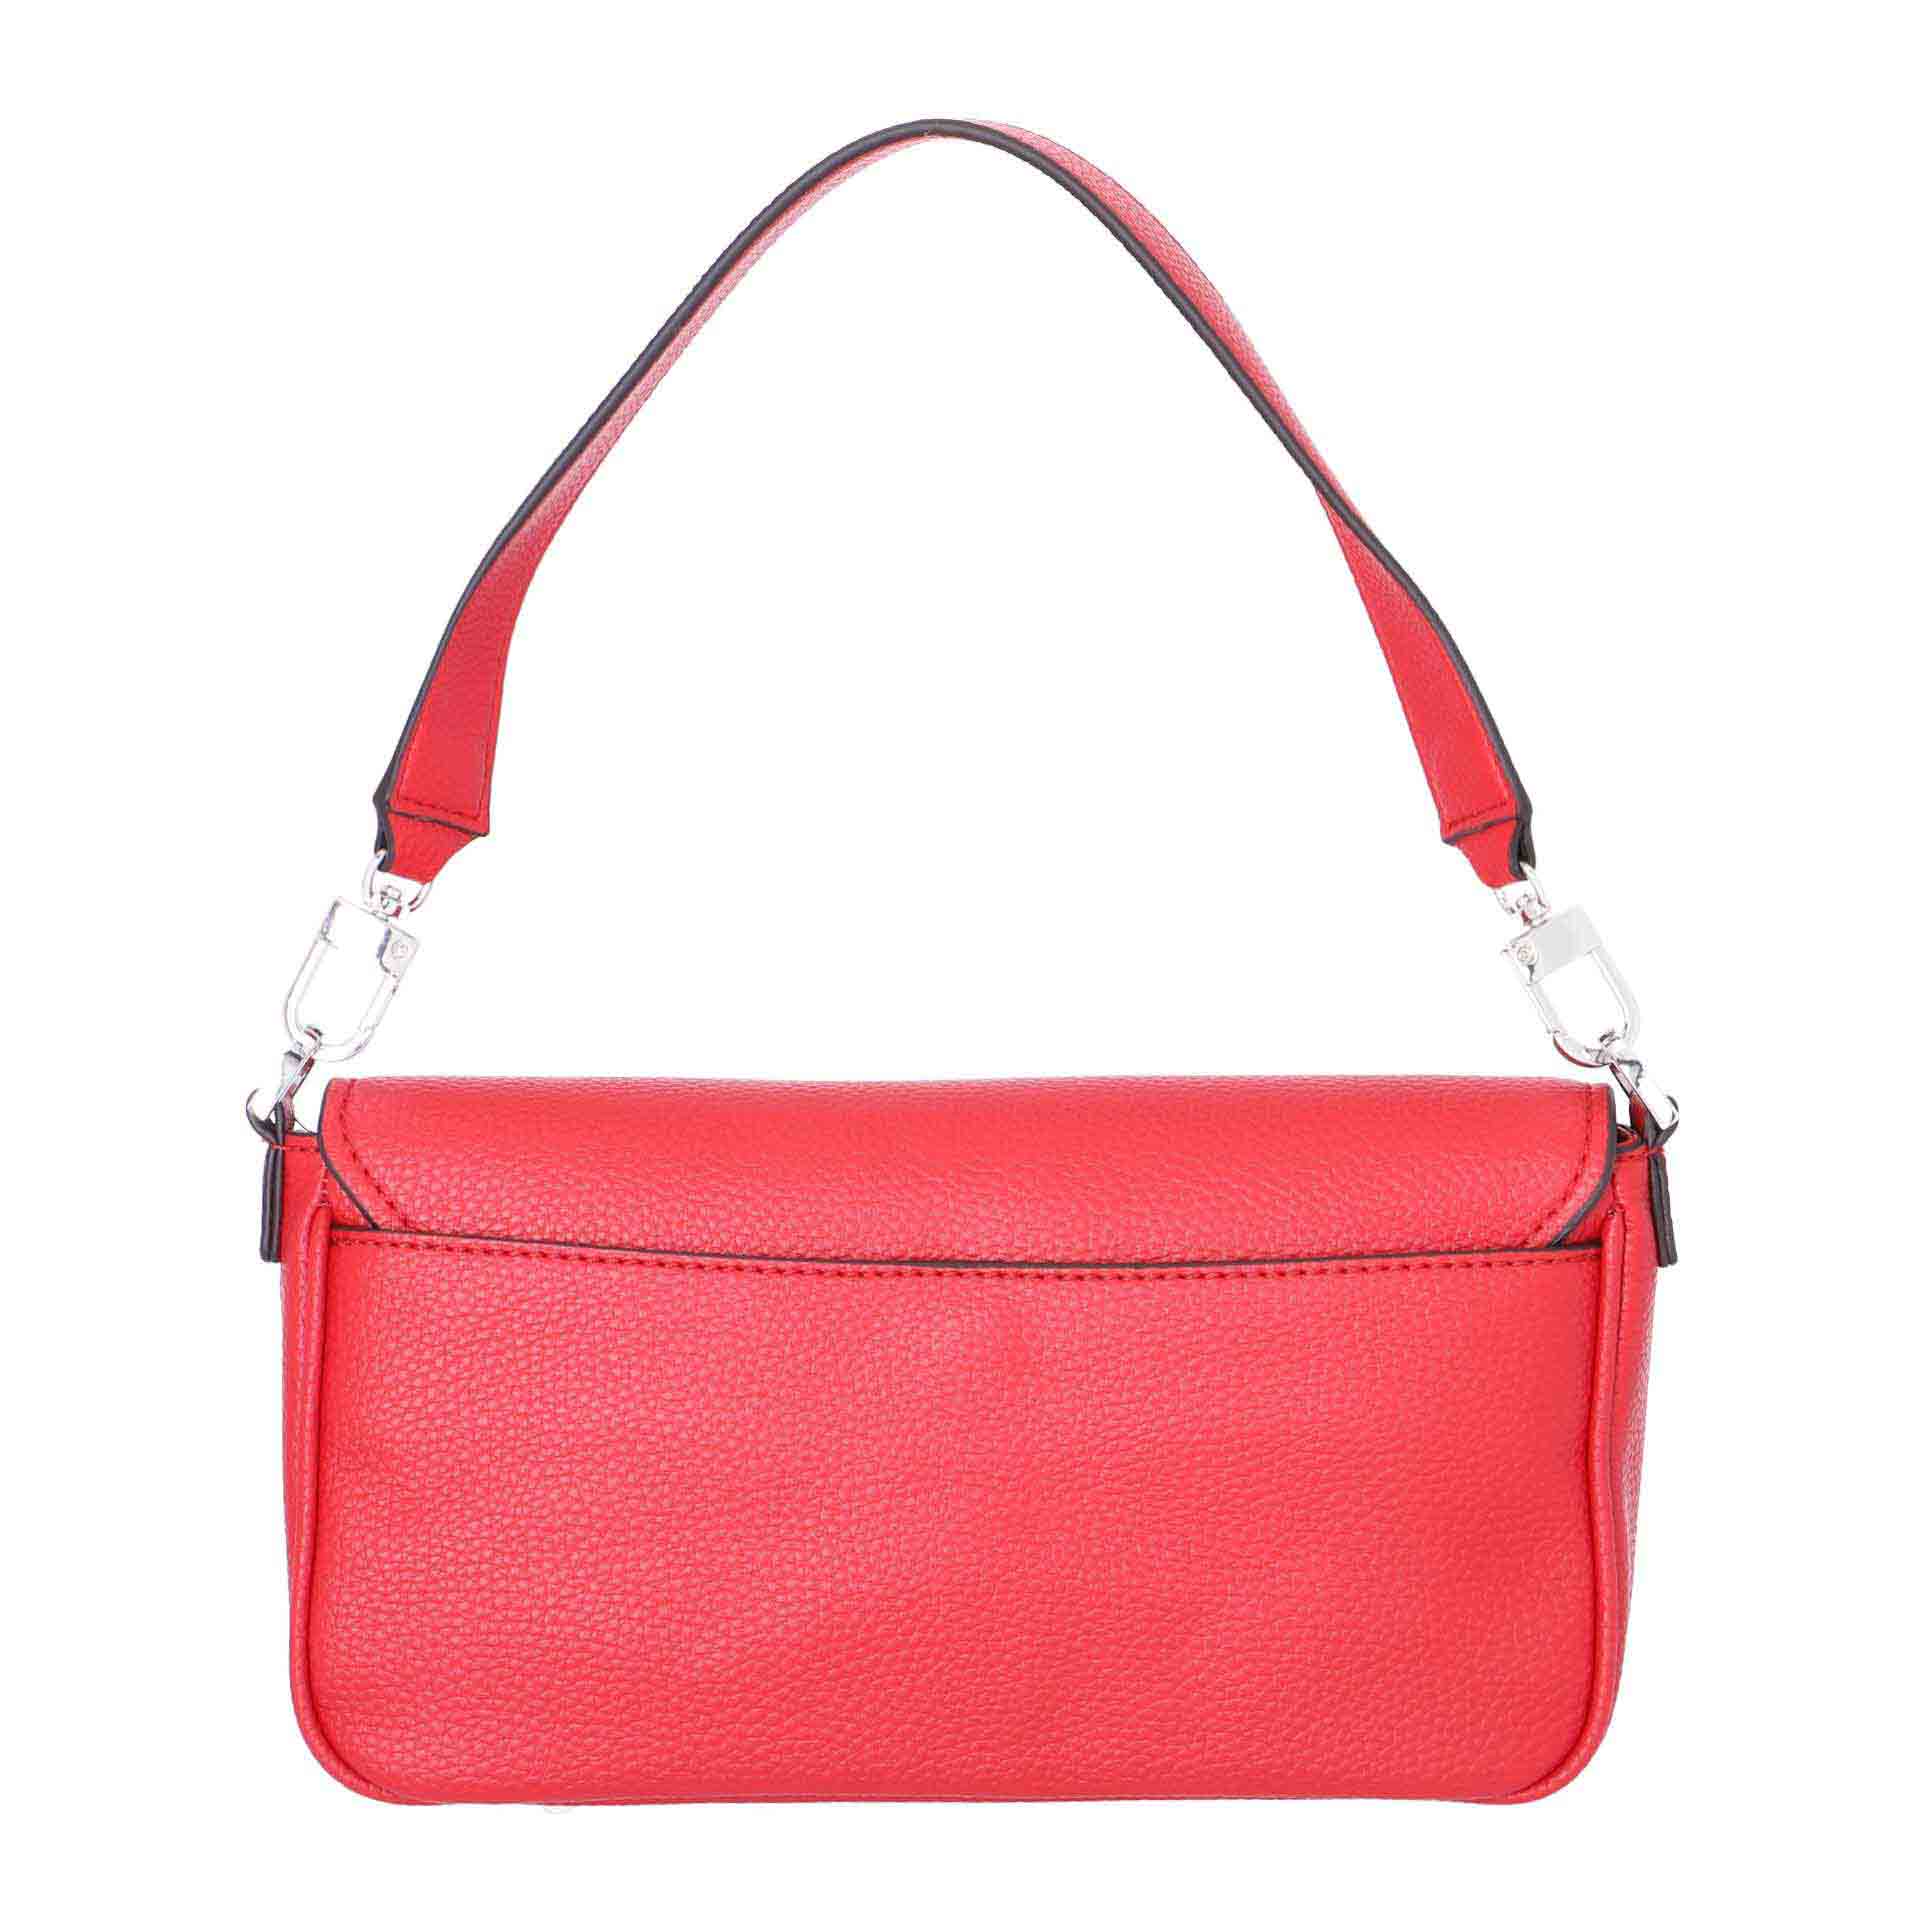 Guess Brightside Schultertasche red